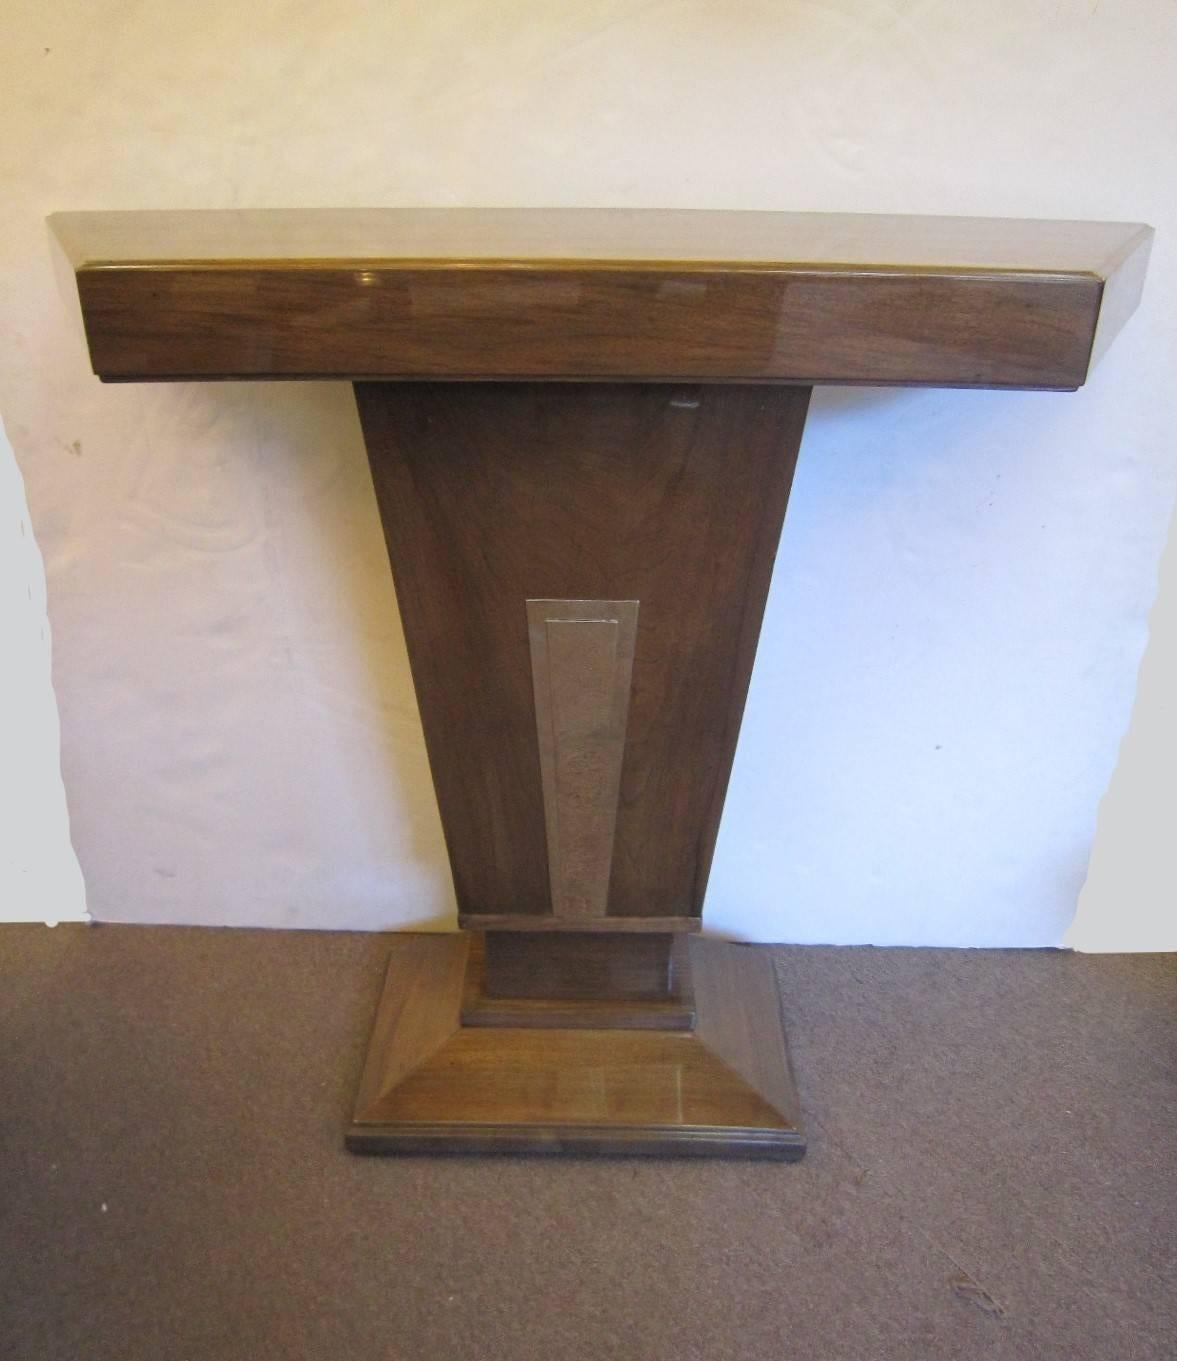 A French moderne grained walnut, gloss lacquered console of cubist design, displaying a tapered angular shaped base with geometric nickeled bronze stepped accent detailing which rests on a rectangular molded plinth.
Note: The front width is 26